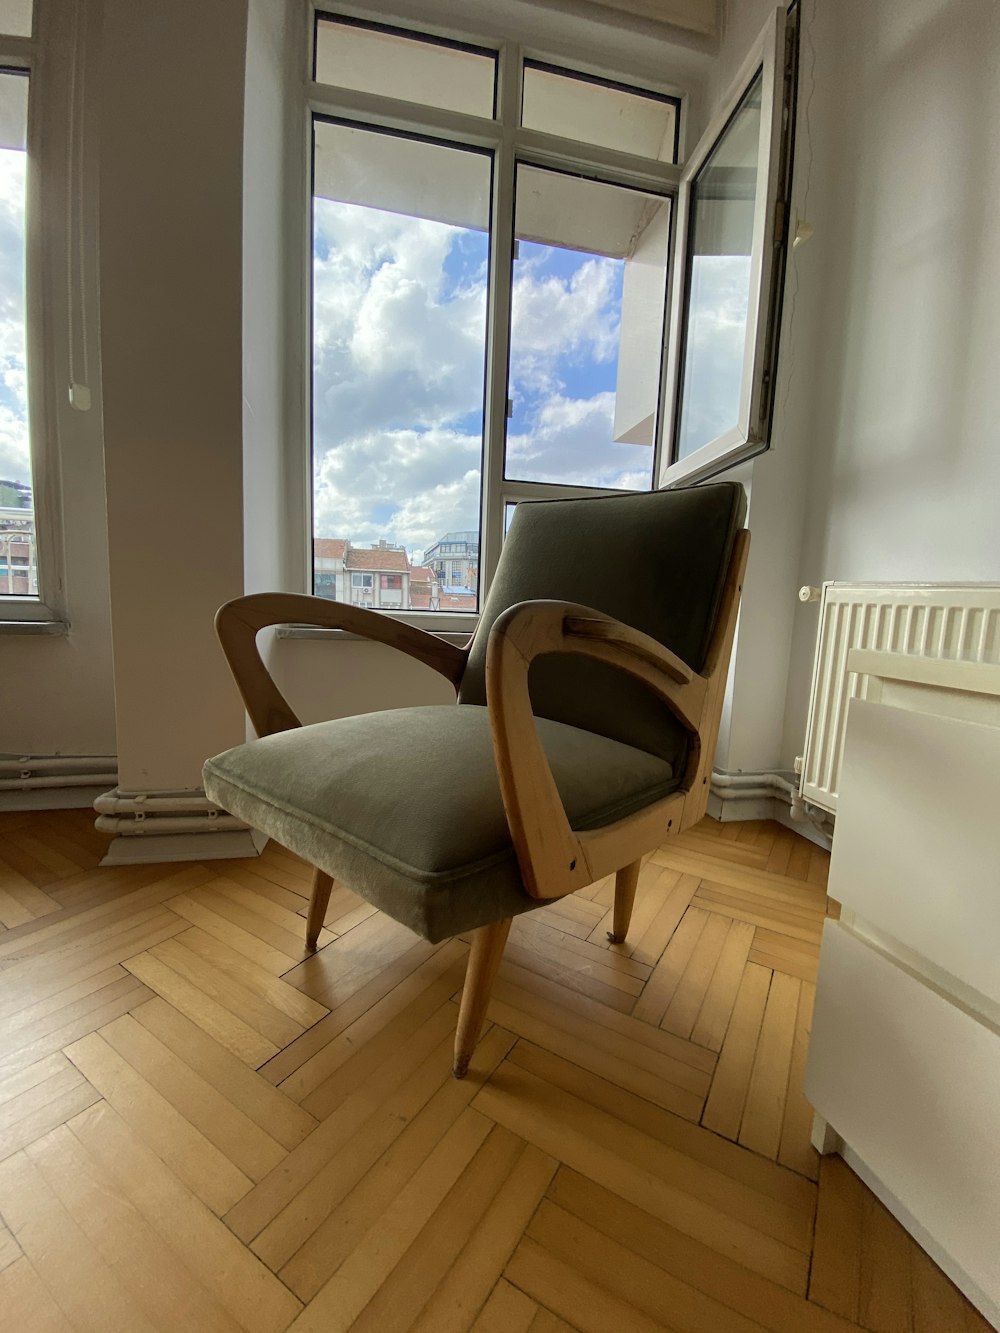 a chair sitting on a hard wood floor in front of a window